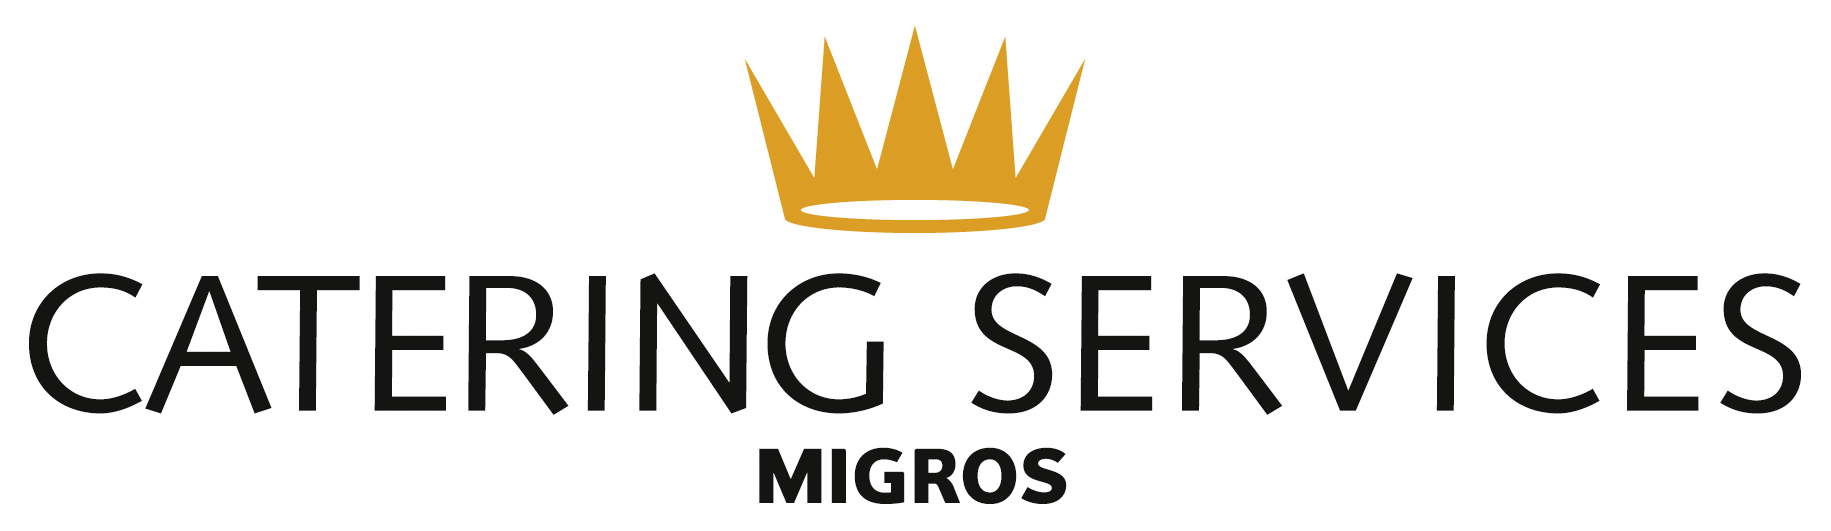 Migros Catering Services | www.swissrowing.ch